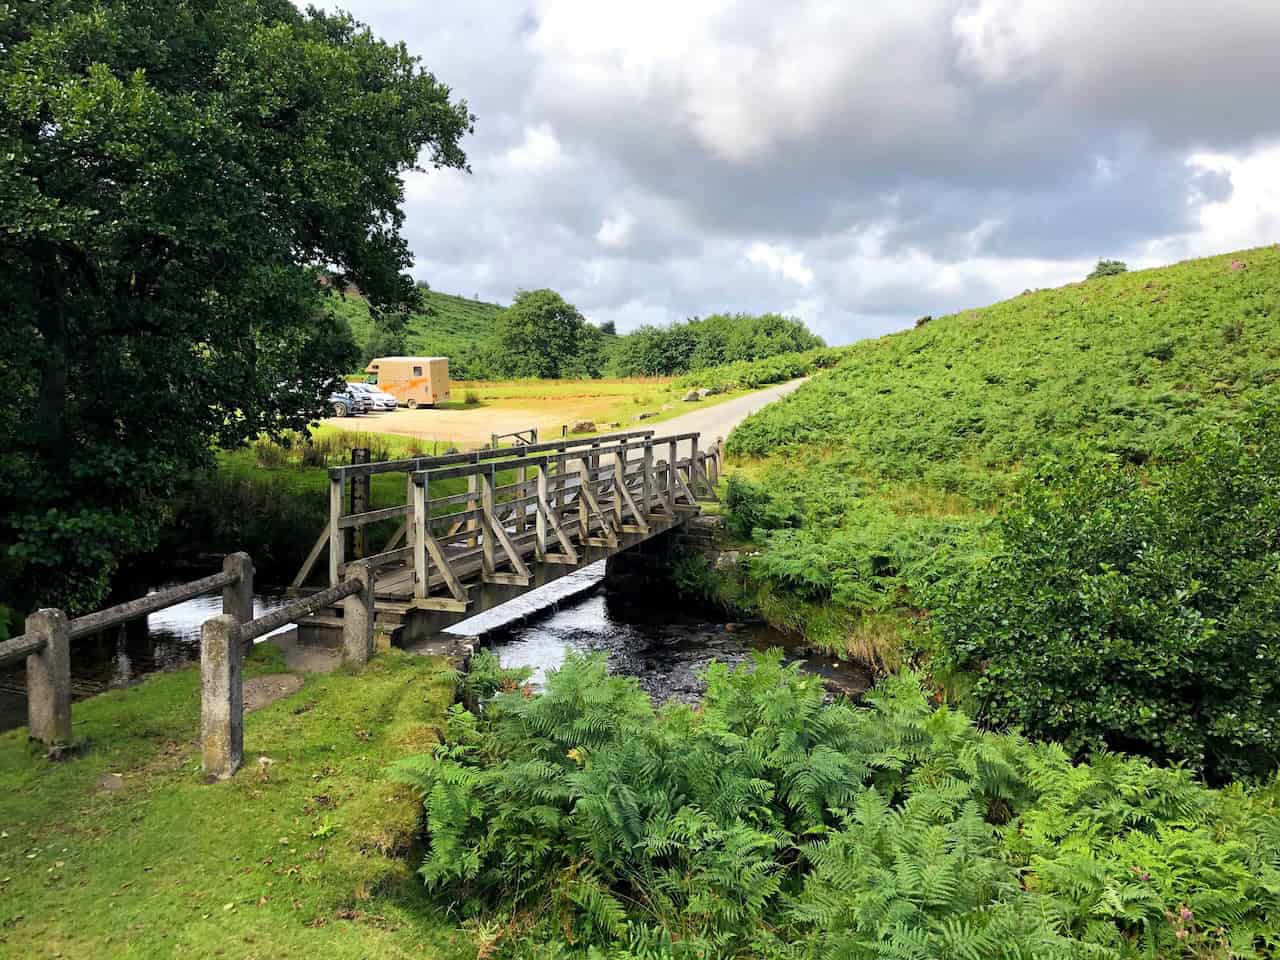 The footbridge across Baysdale Beck at Hob Hole marks a charming end to the Baysdale Abbey walk.